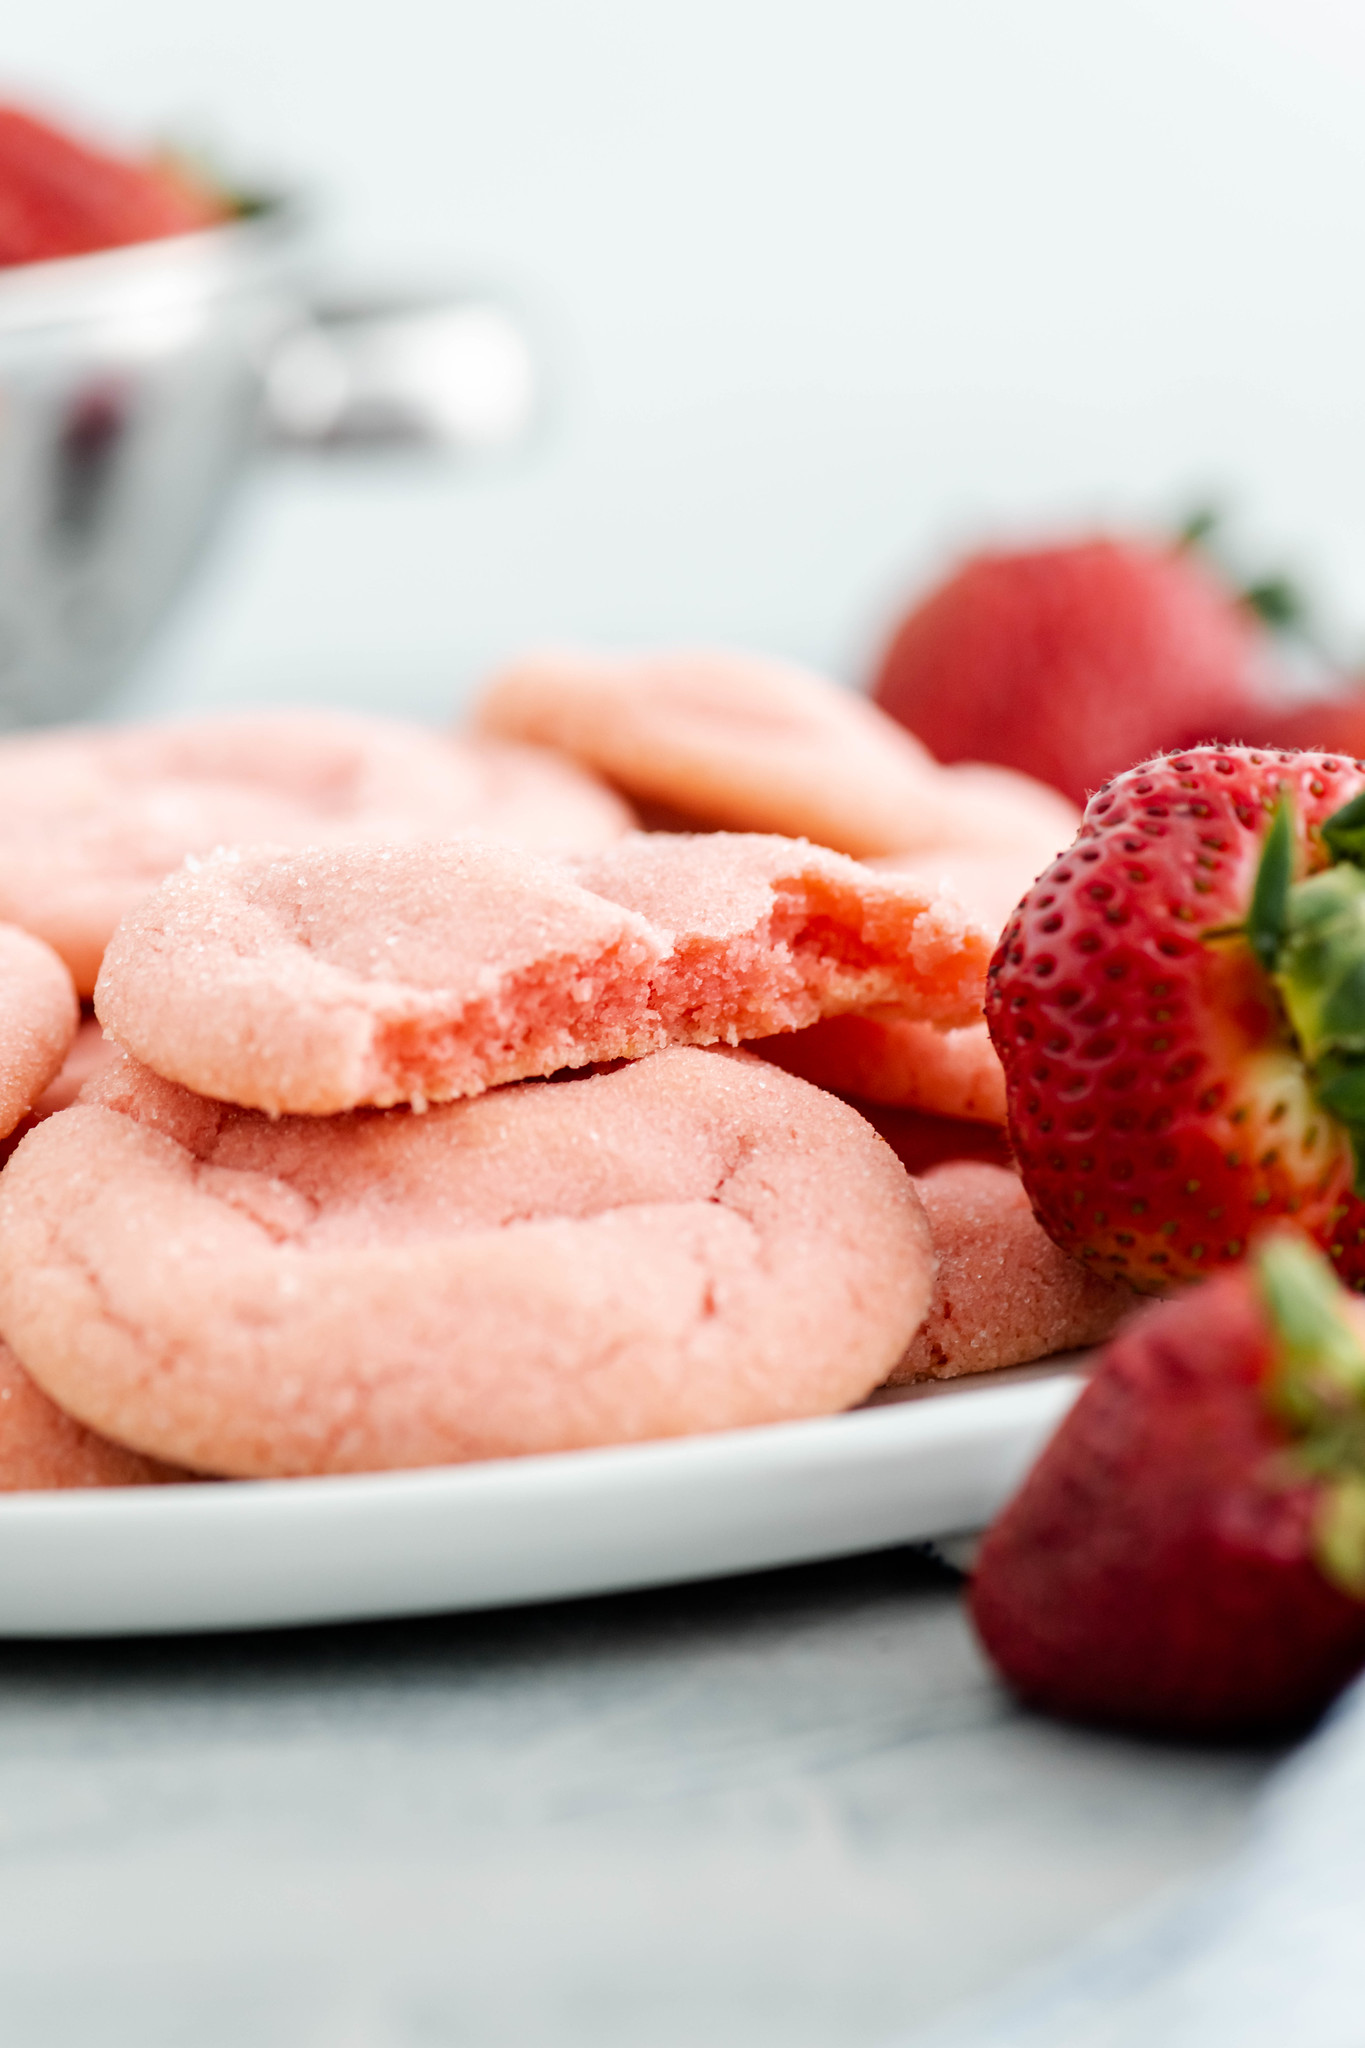 White round plate piled with strawberry cookies. One cookie broken in half to show inside.